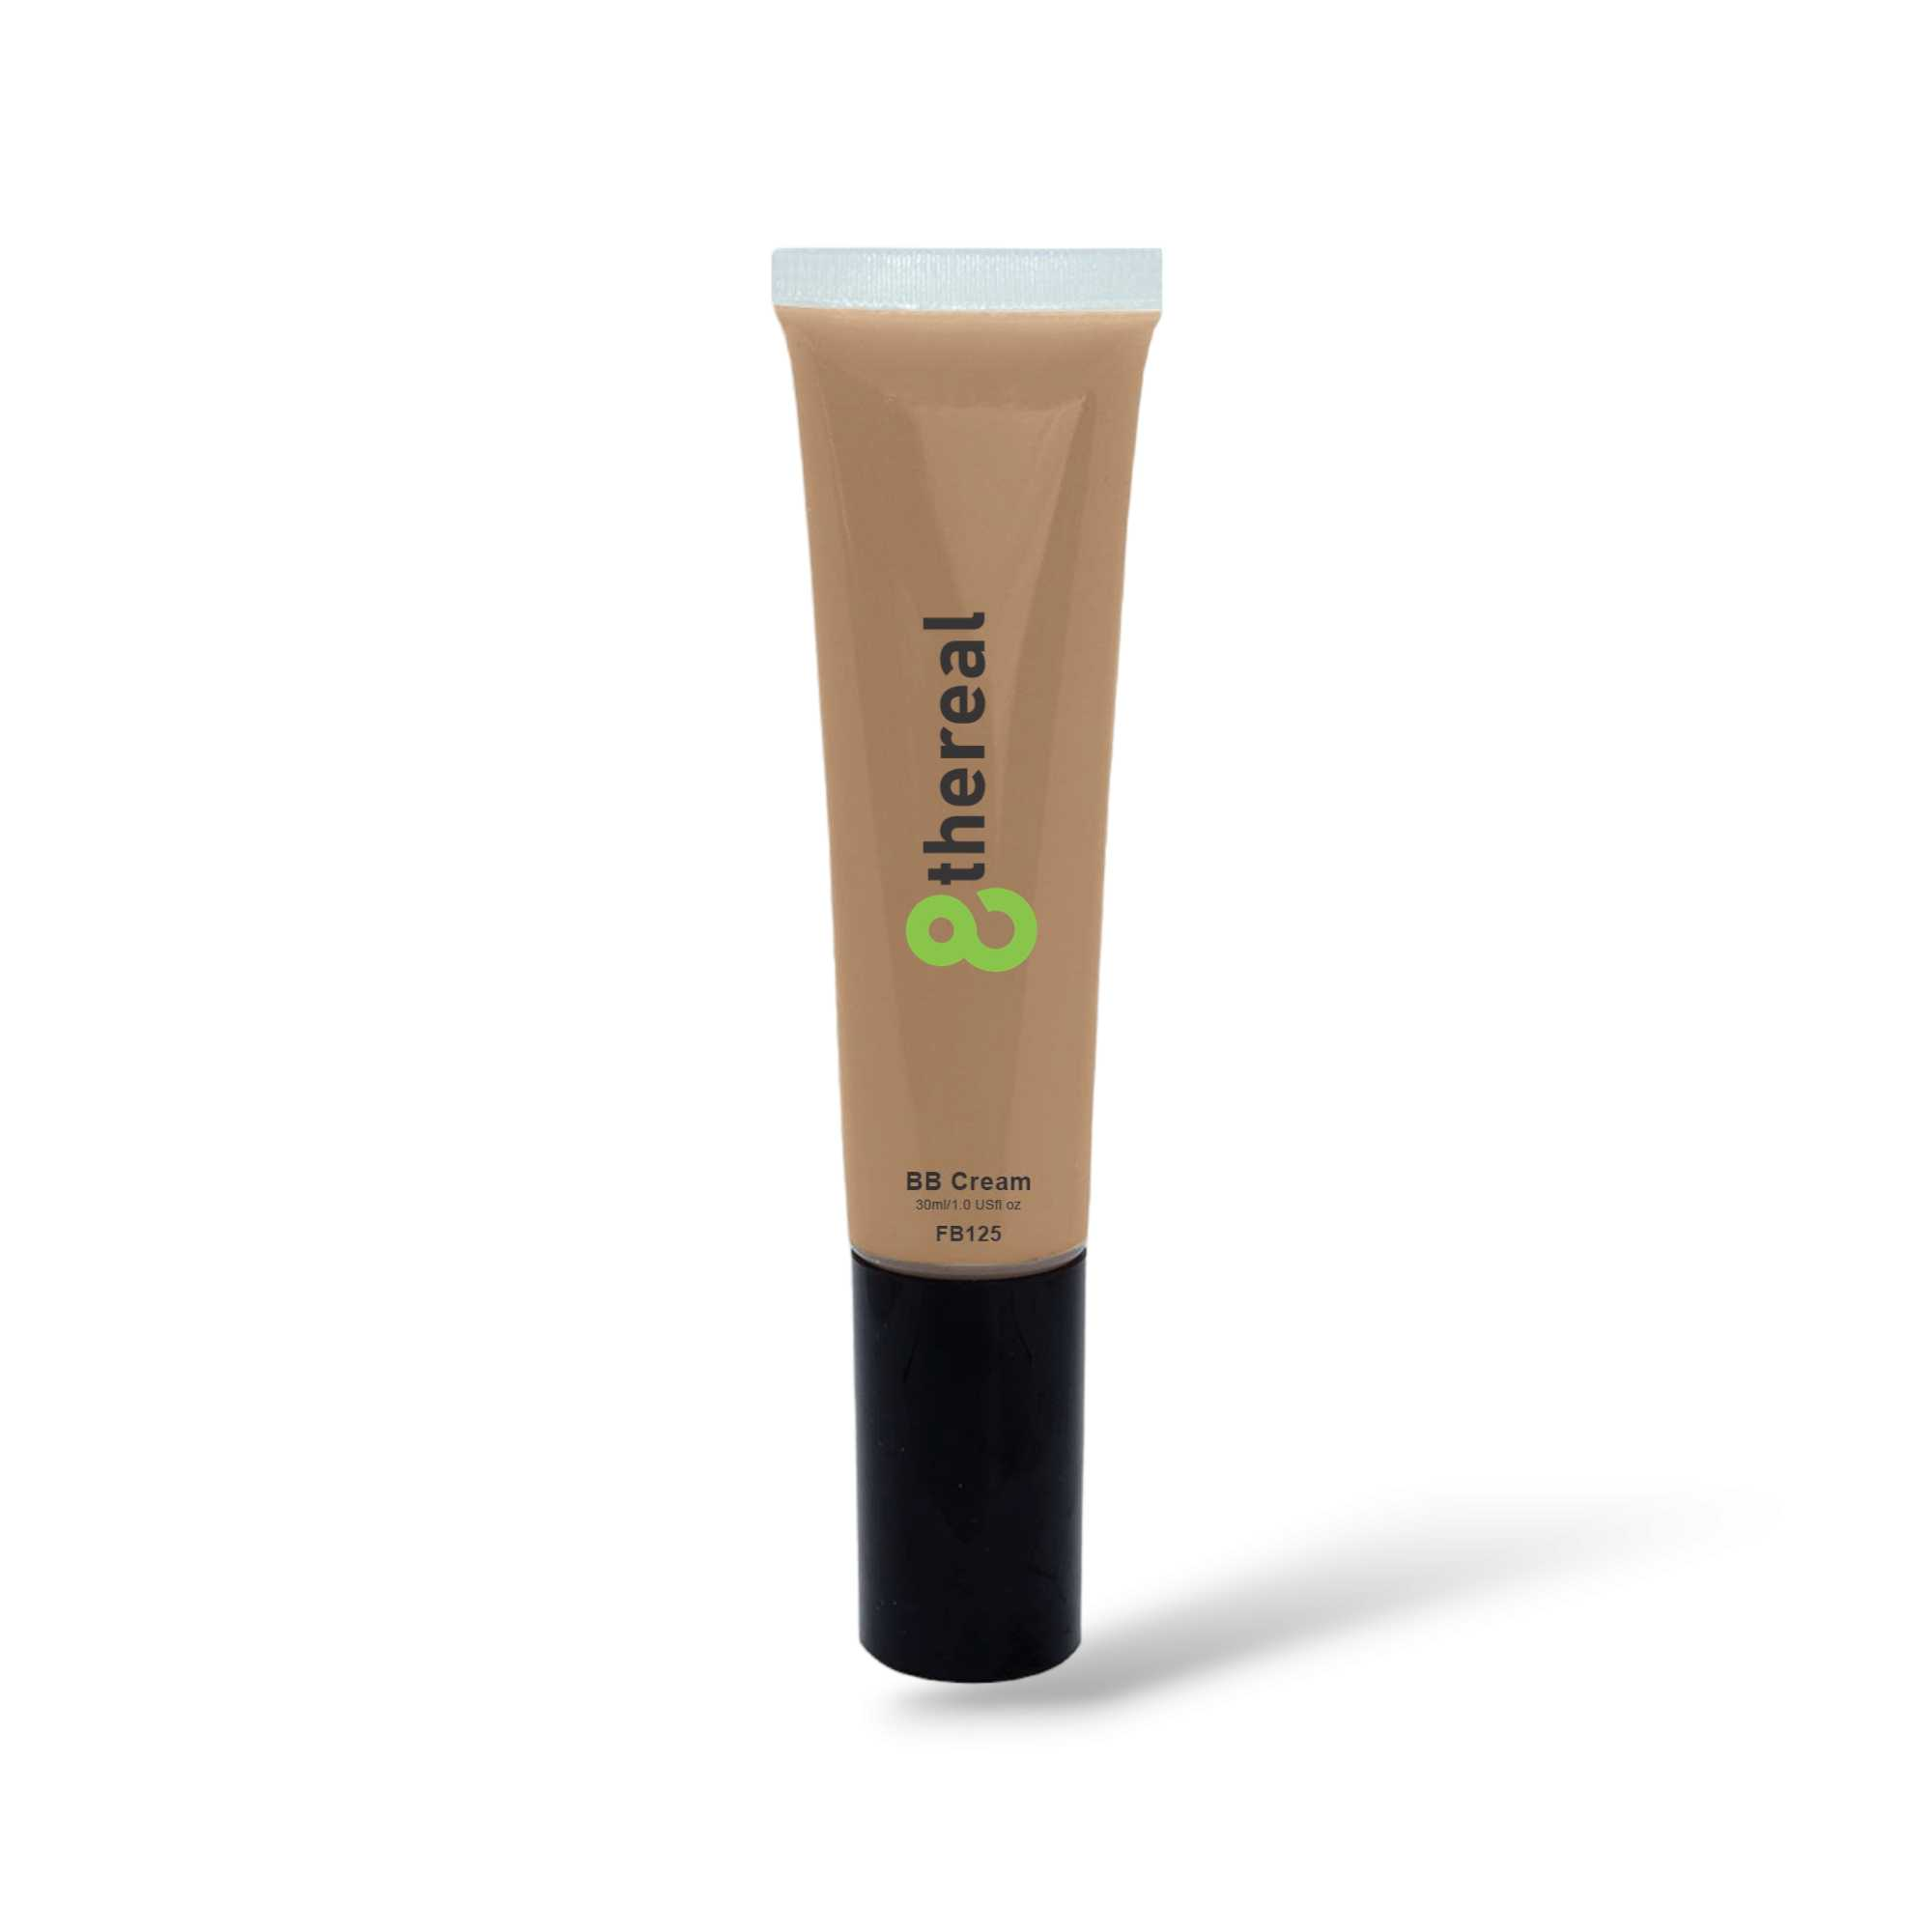 BB Cream - Enhance Your Complexion with This Multi-Benefit Product